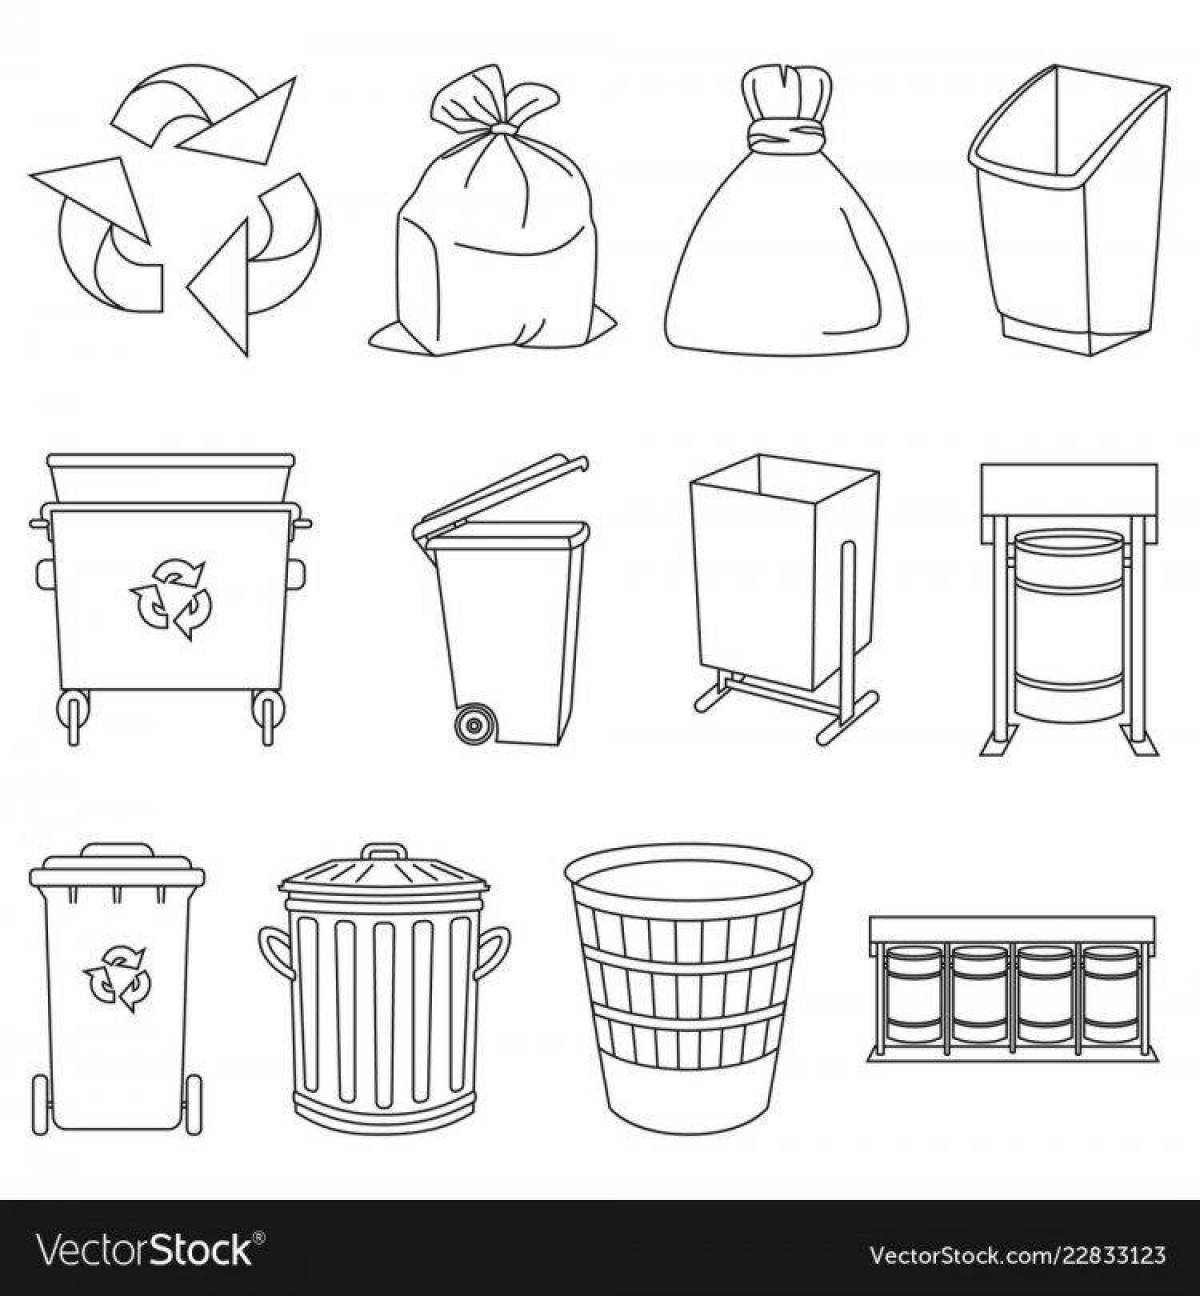 Colourful wastebasket coloring page